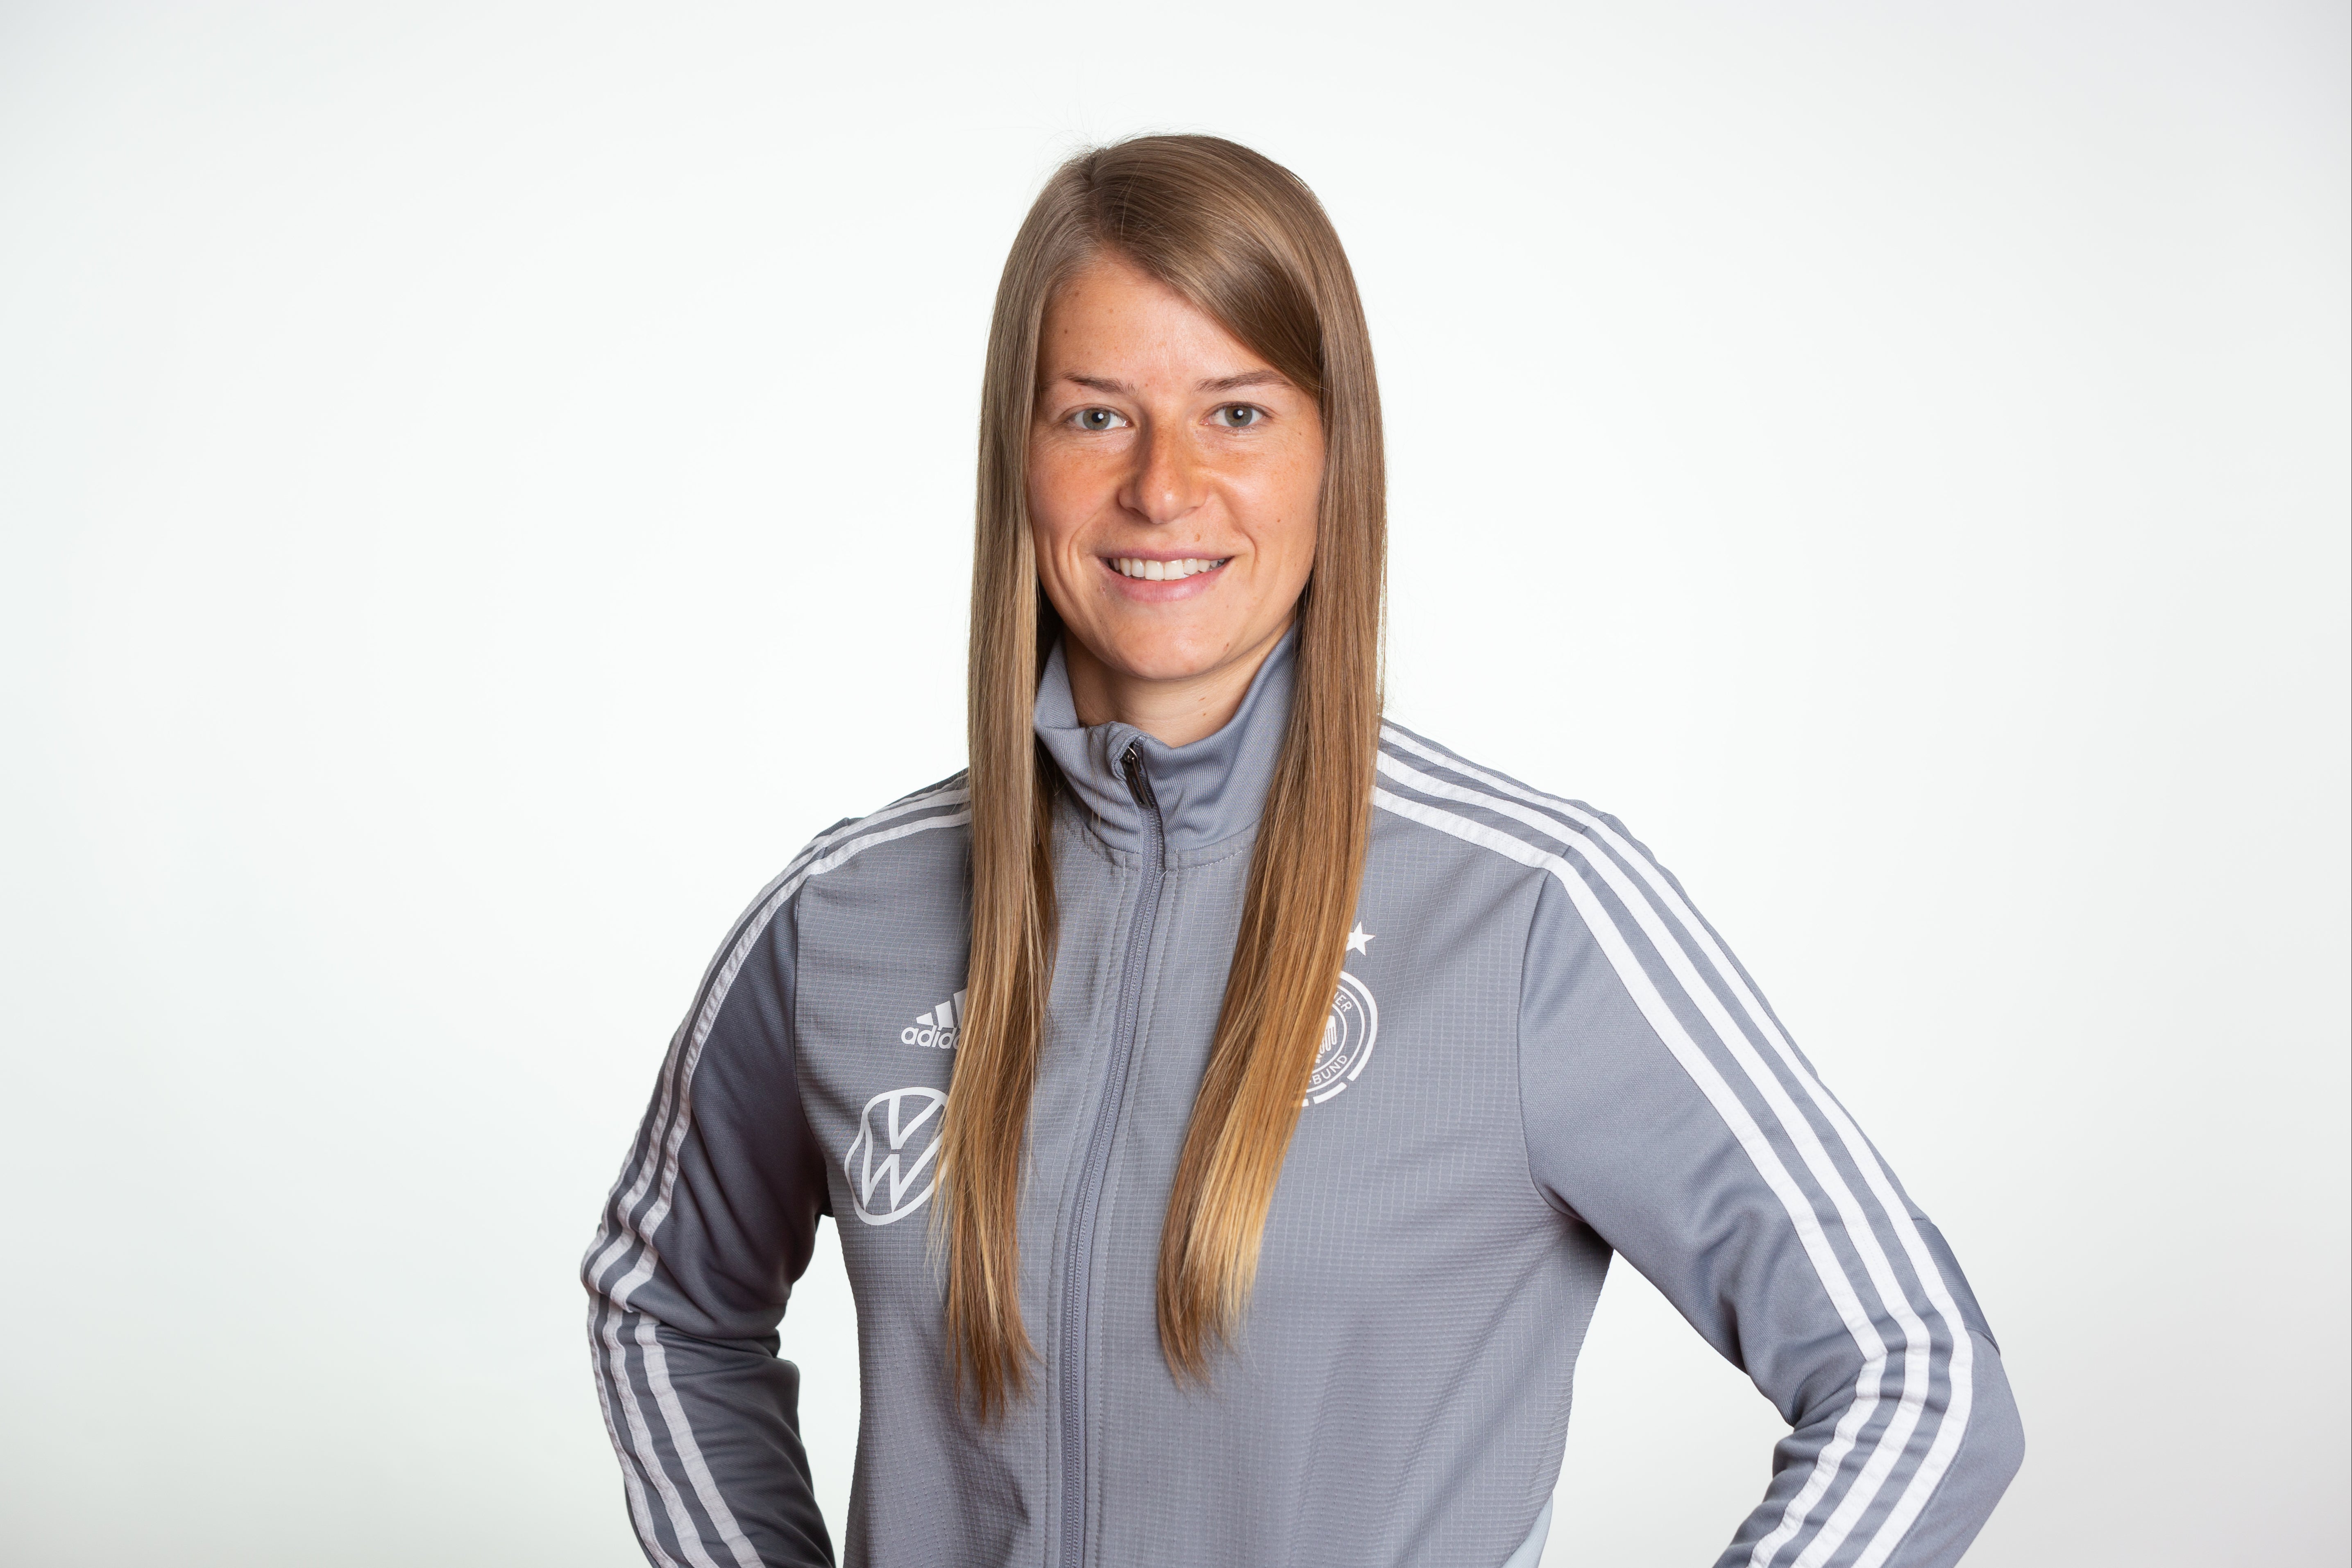 Union Berlin's Marie-Louise Eta set to become first female assistant coach  in Bundesliga